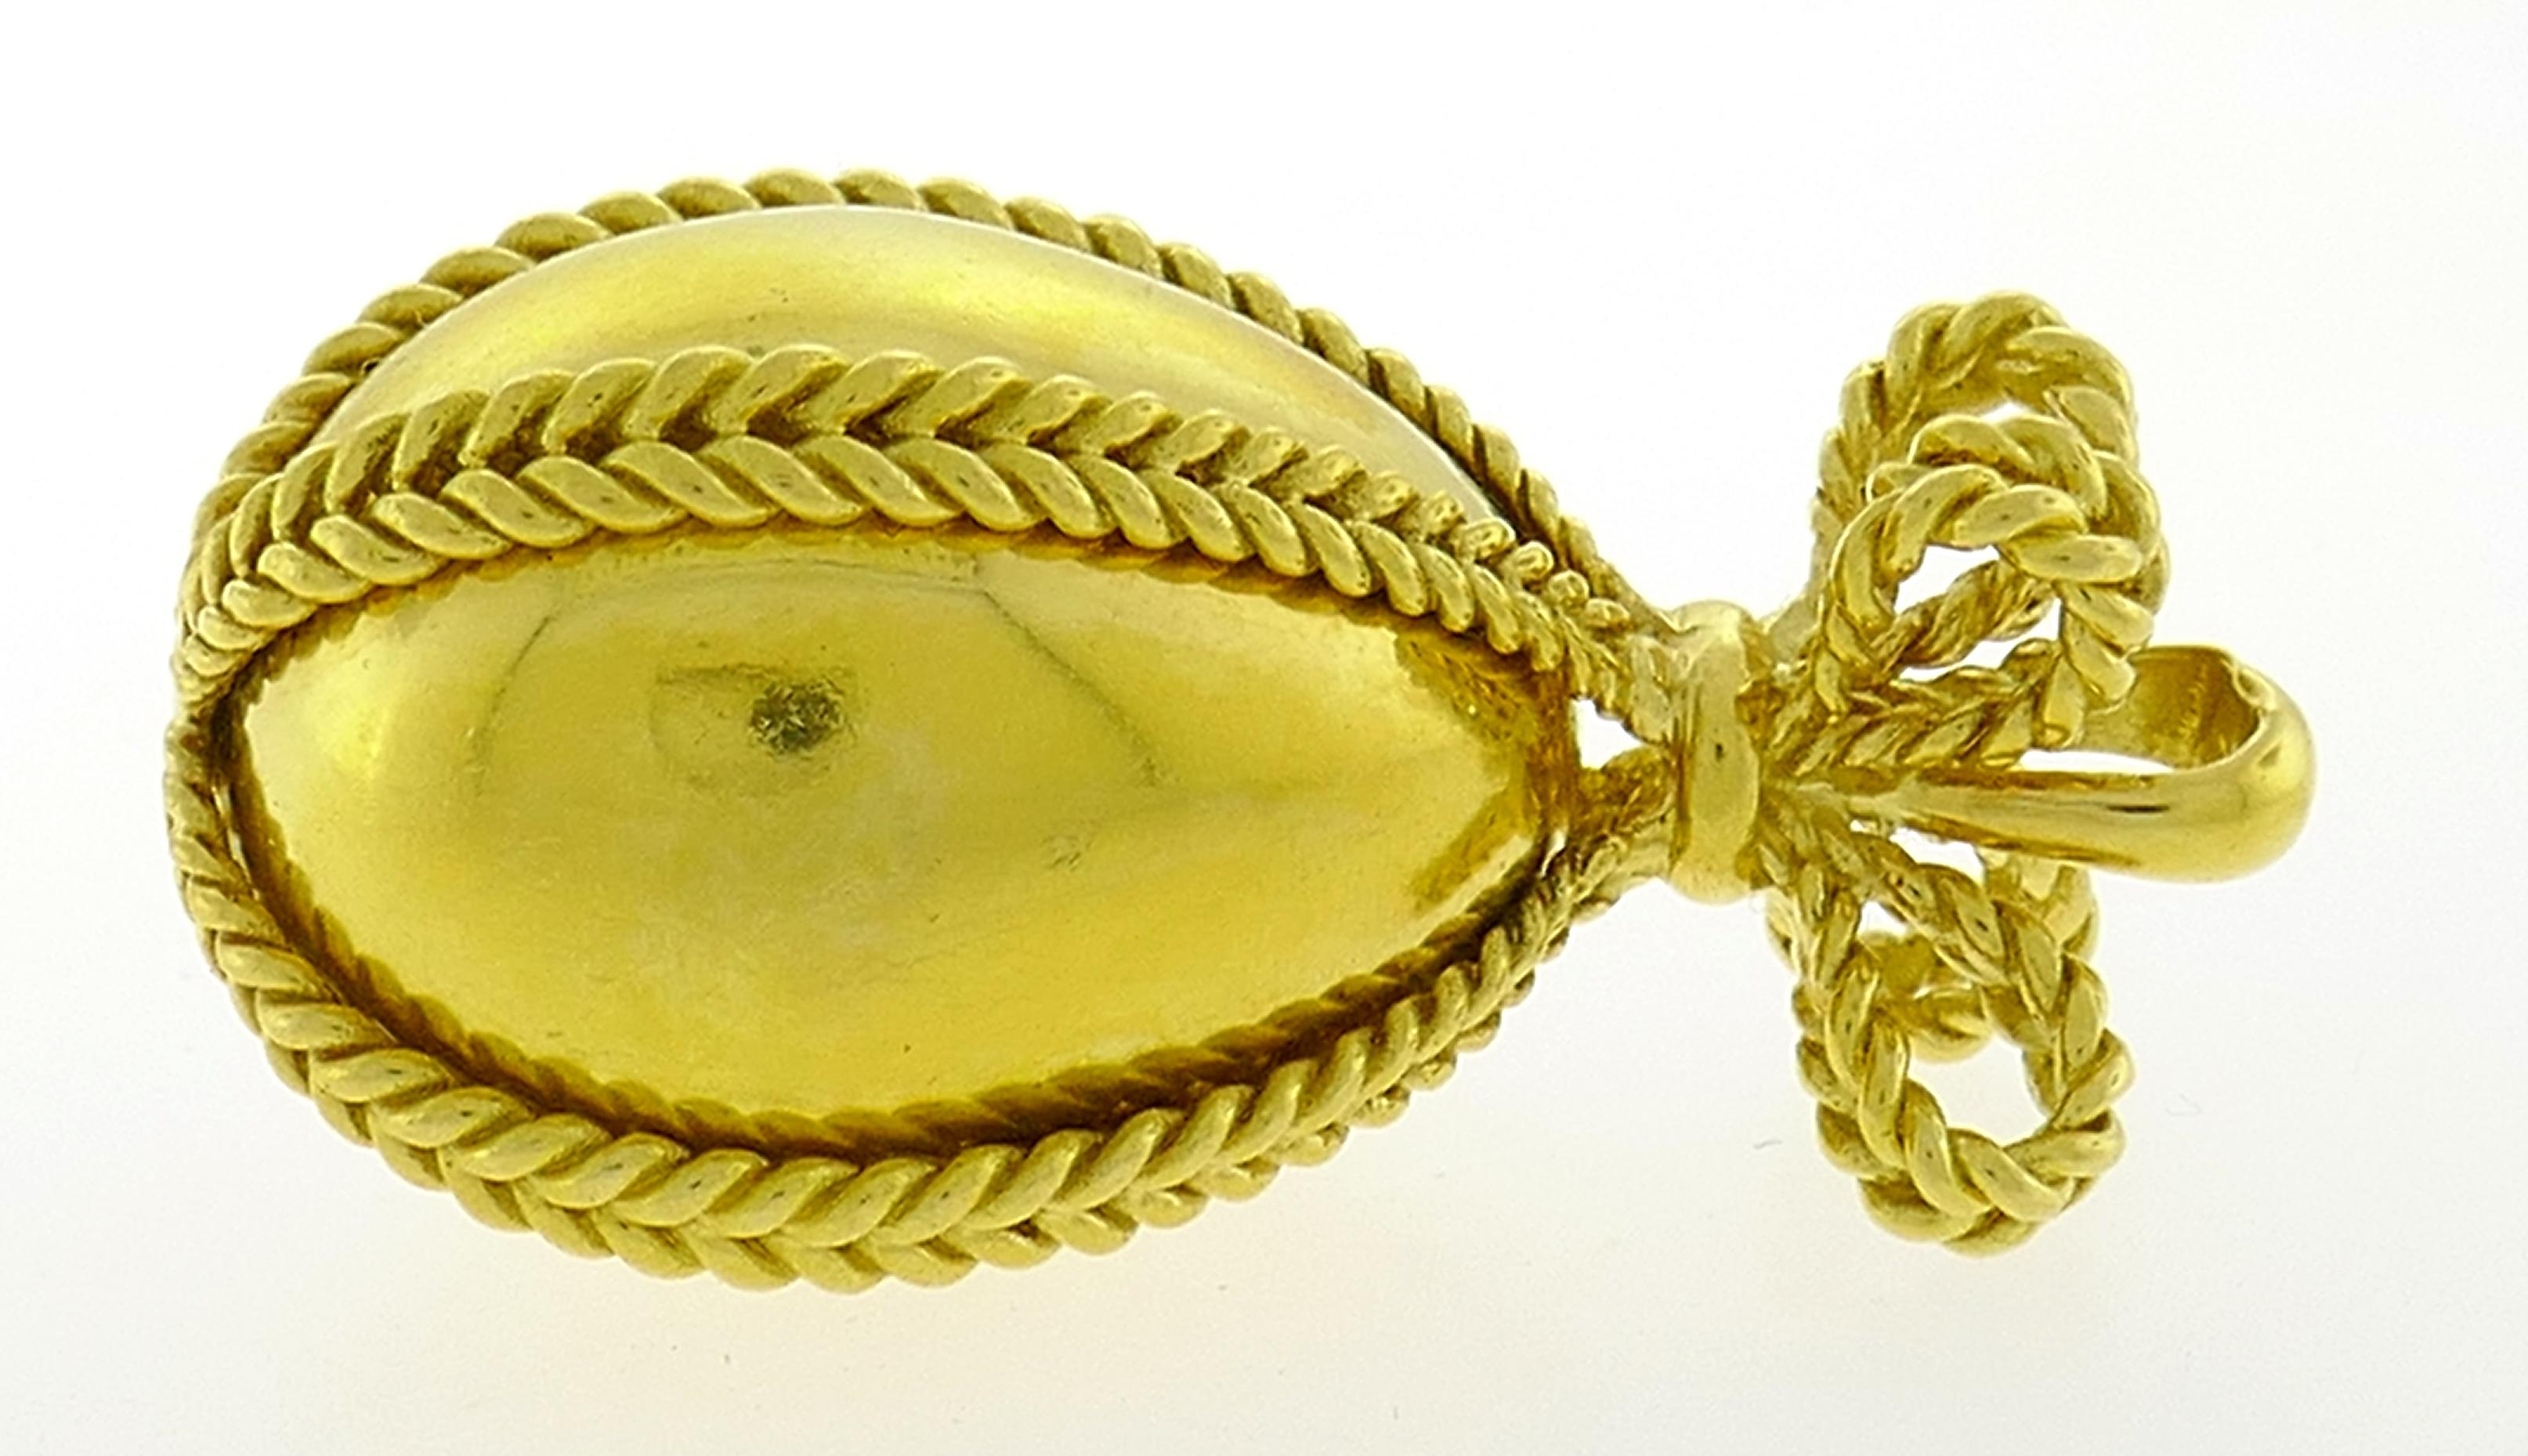 Lovely egg charm pendant created in France in the 1980s. 
The pendant is made of 18 karat (tested) yellow gold. 
The pendant measures 1-1/2 x 3/4 inches (3.8 x 1.8 centimeters) and weighs 15.8 grams. 
The bail is stamped with French hallmark for 18